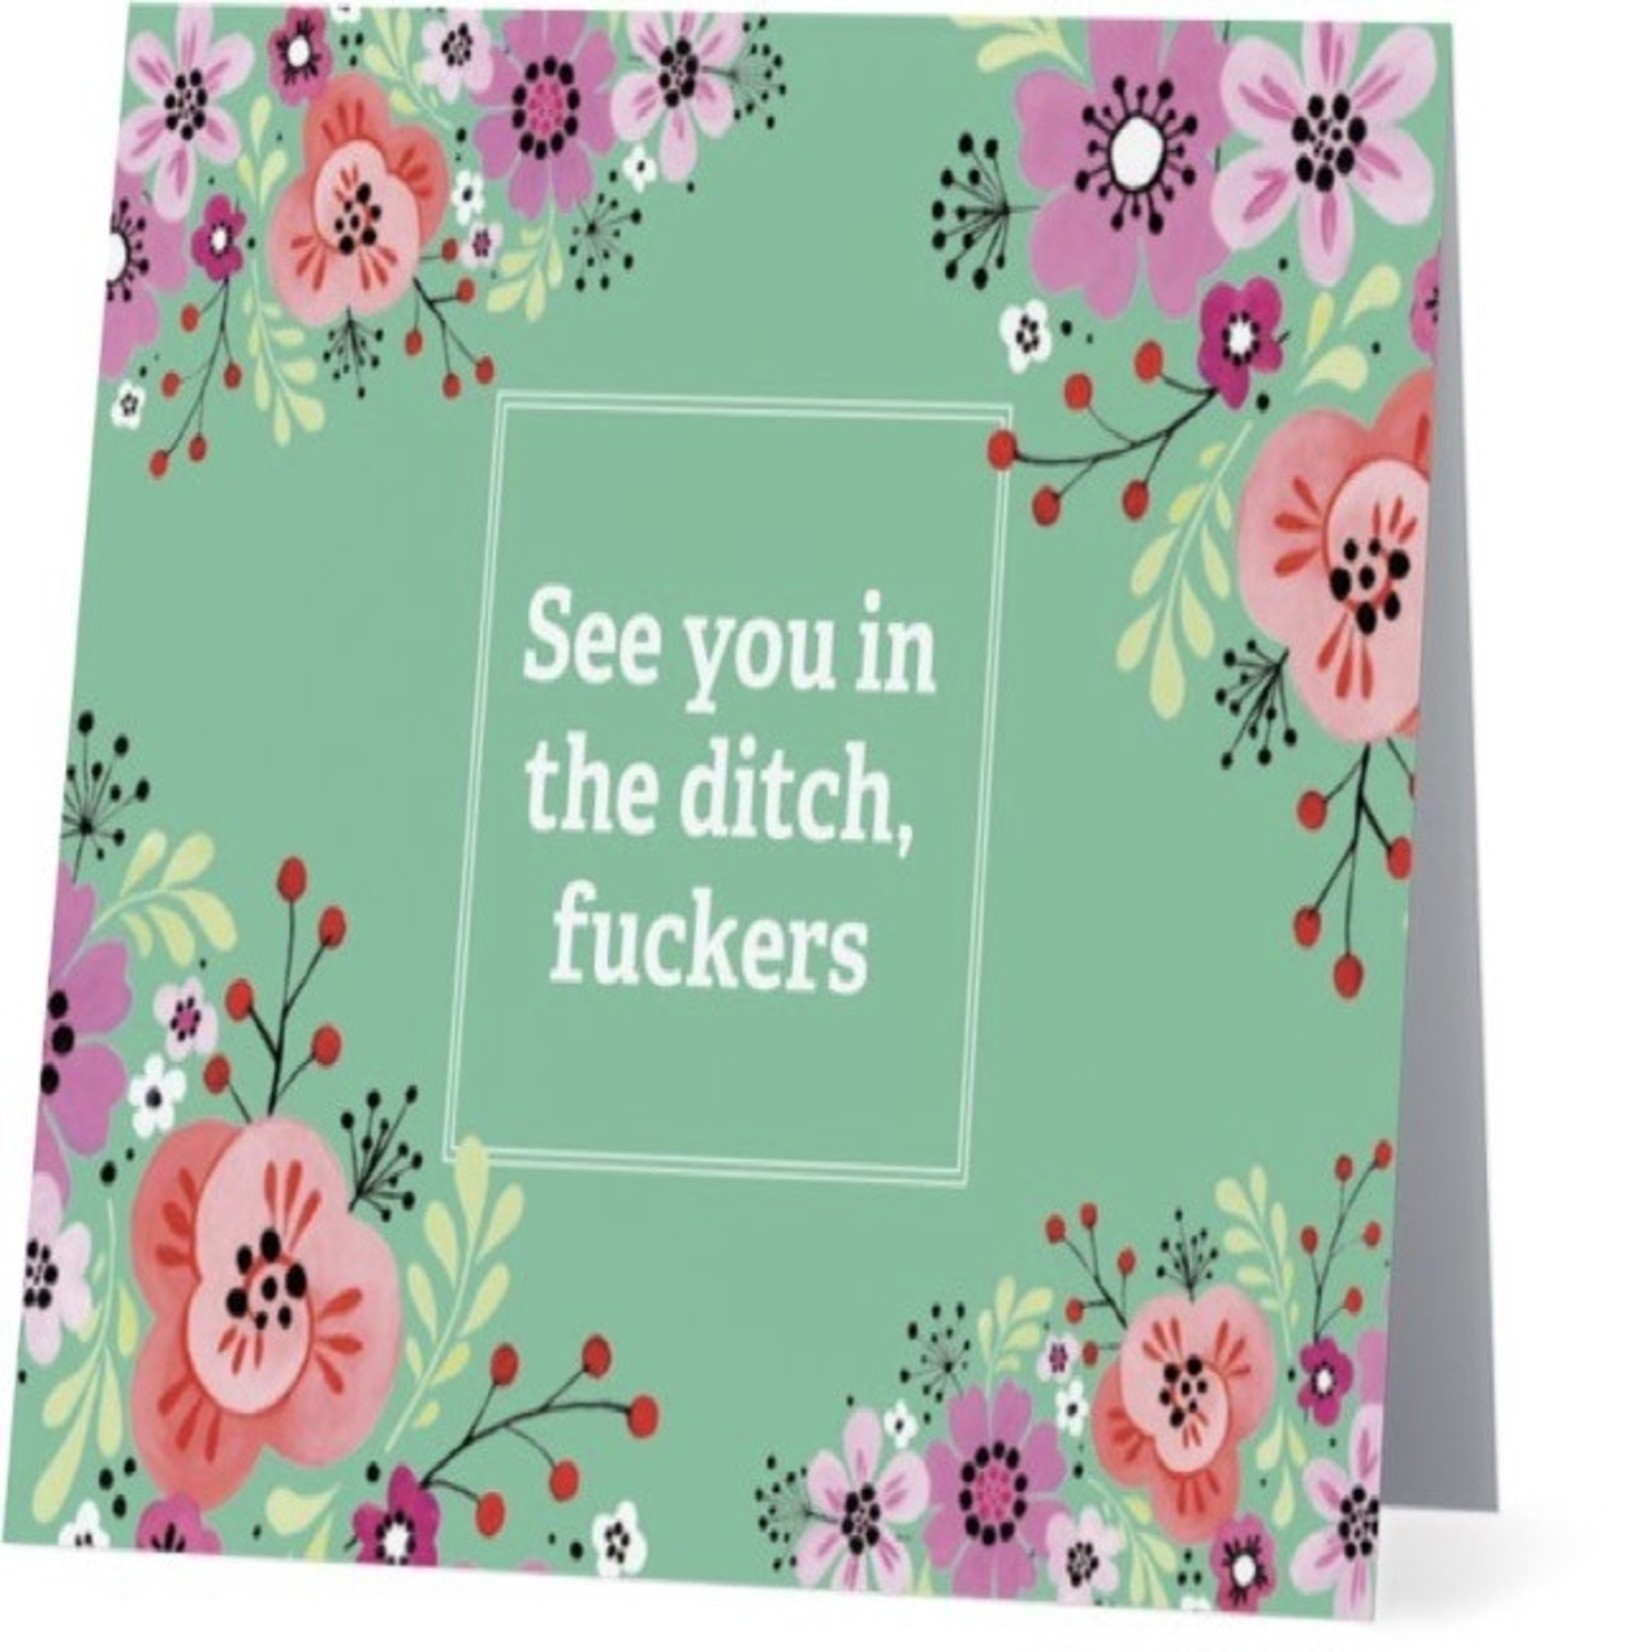 Bad Annie’s Card #028 - See You In The Ditch